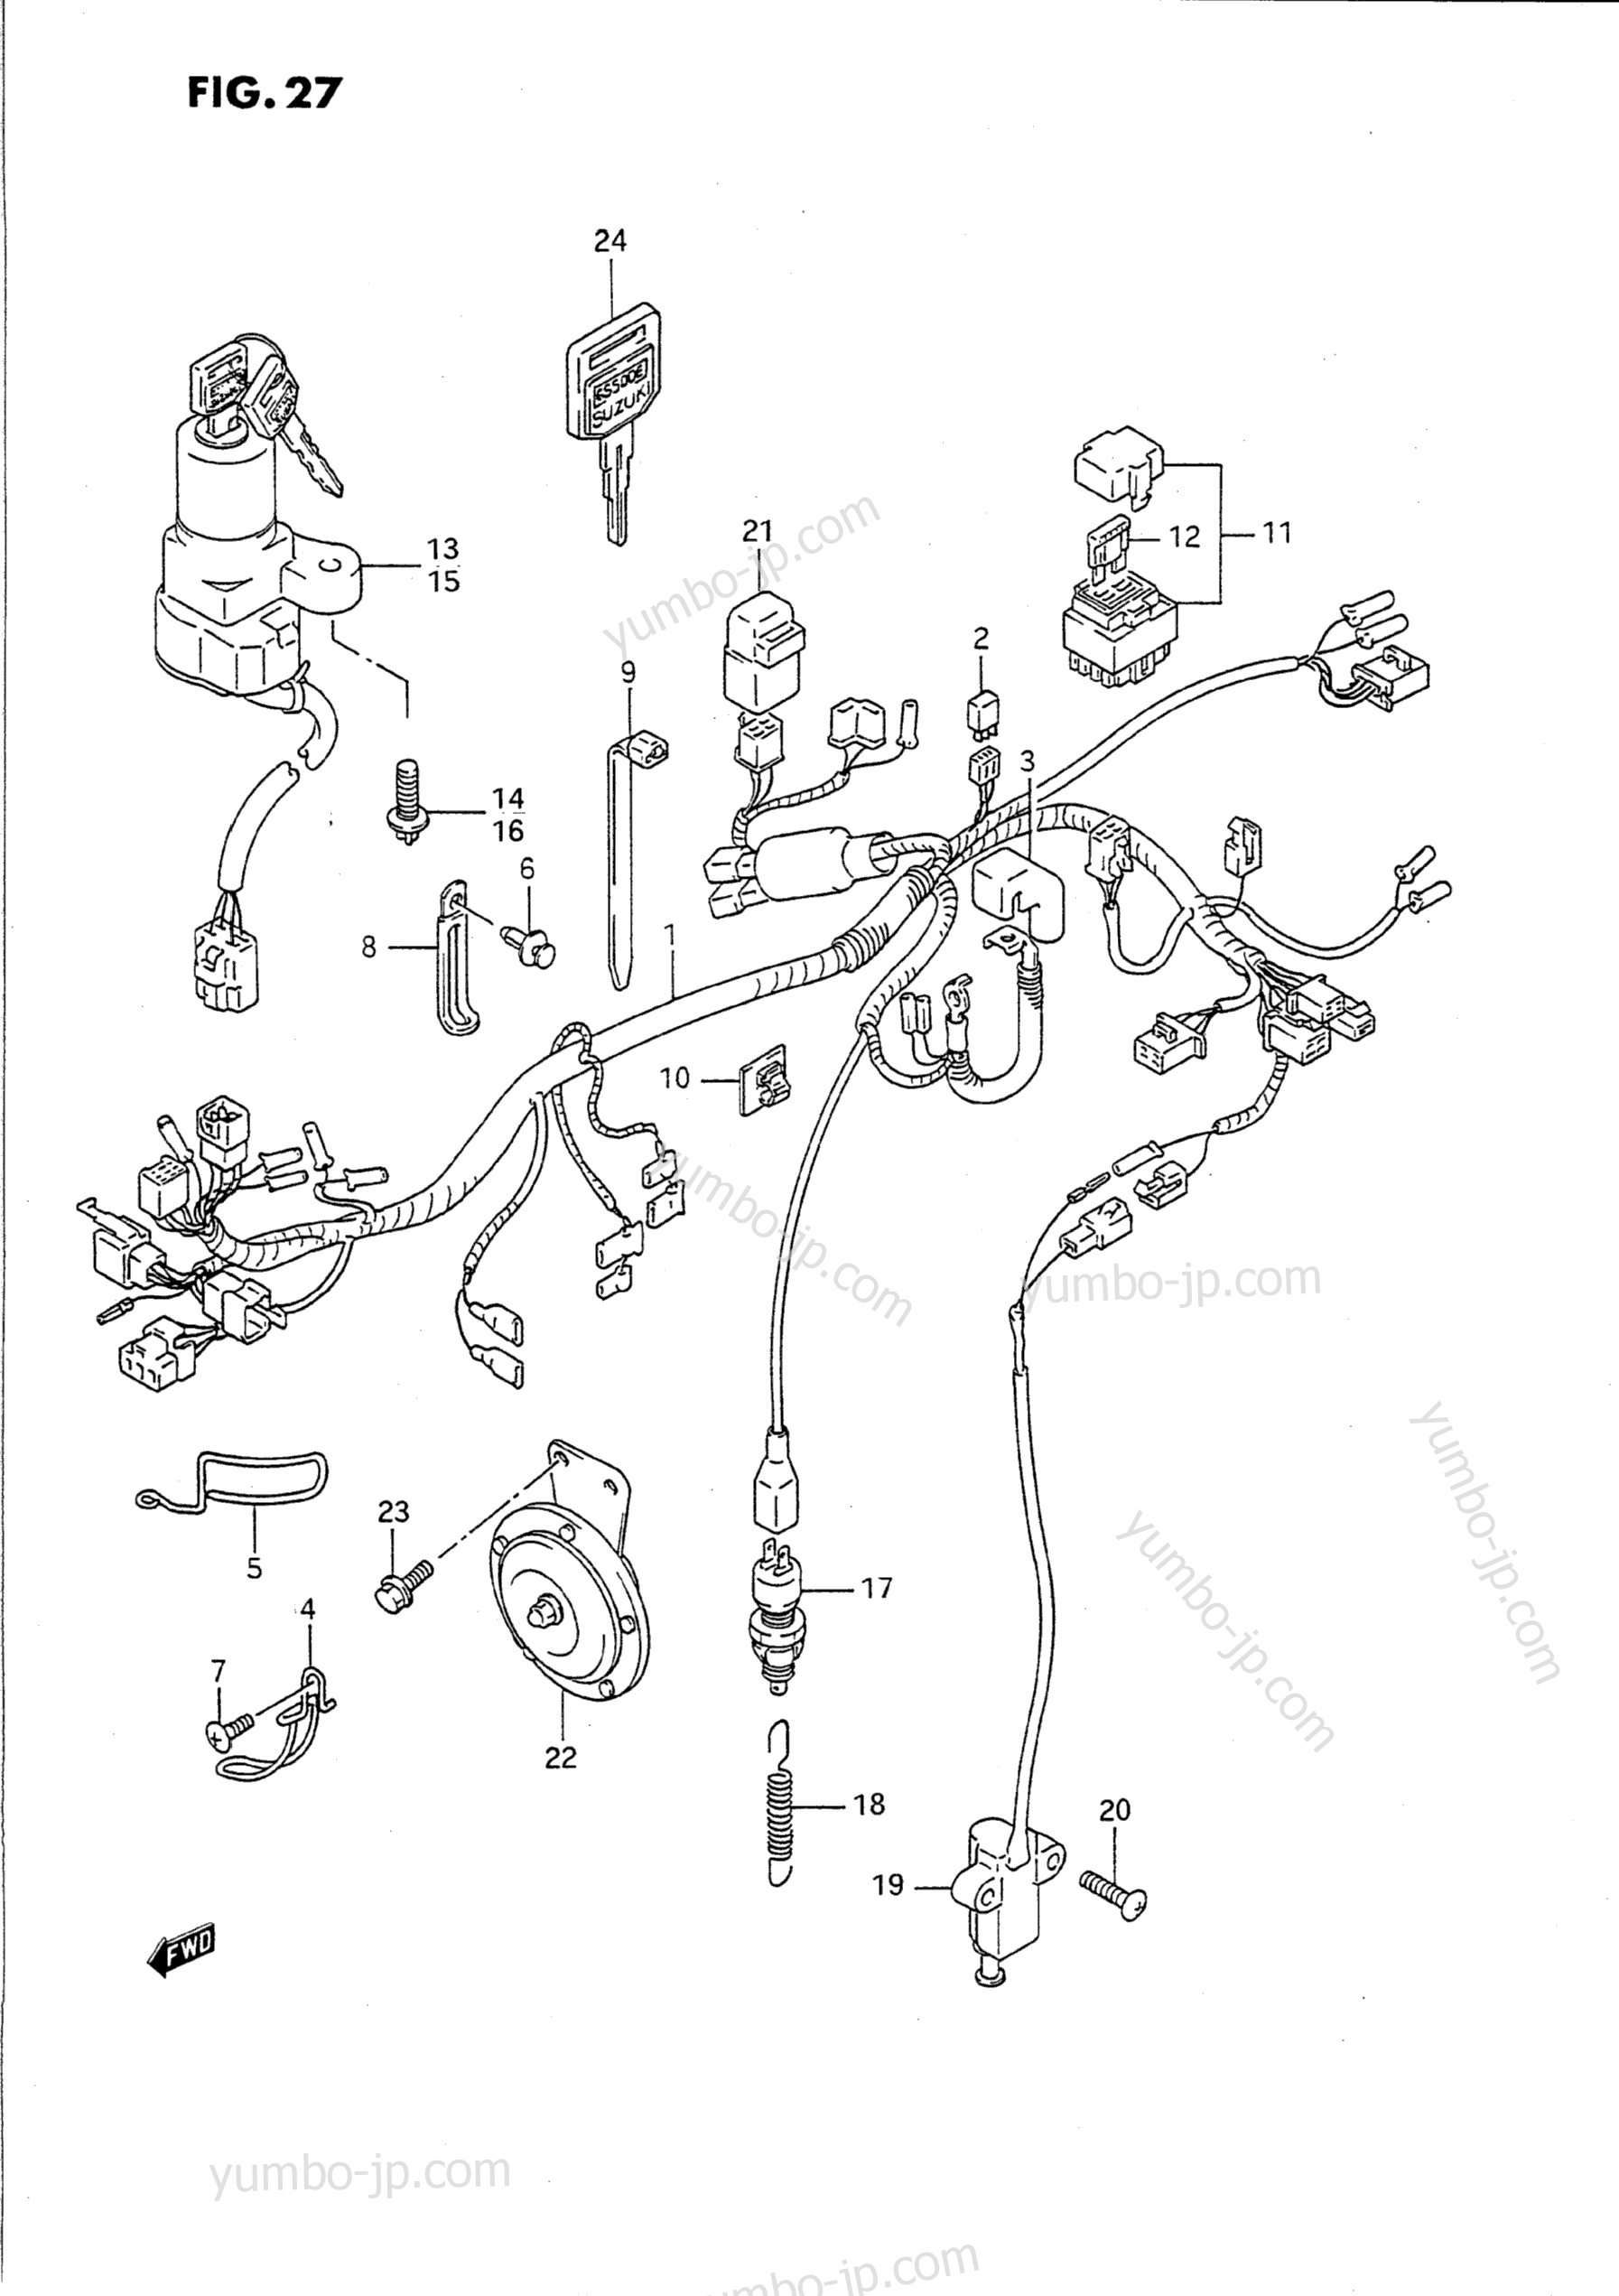 WIRING HARNESS for motorcycles SUZUKI GS500E 1992 year